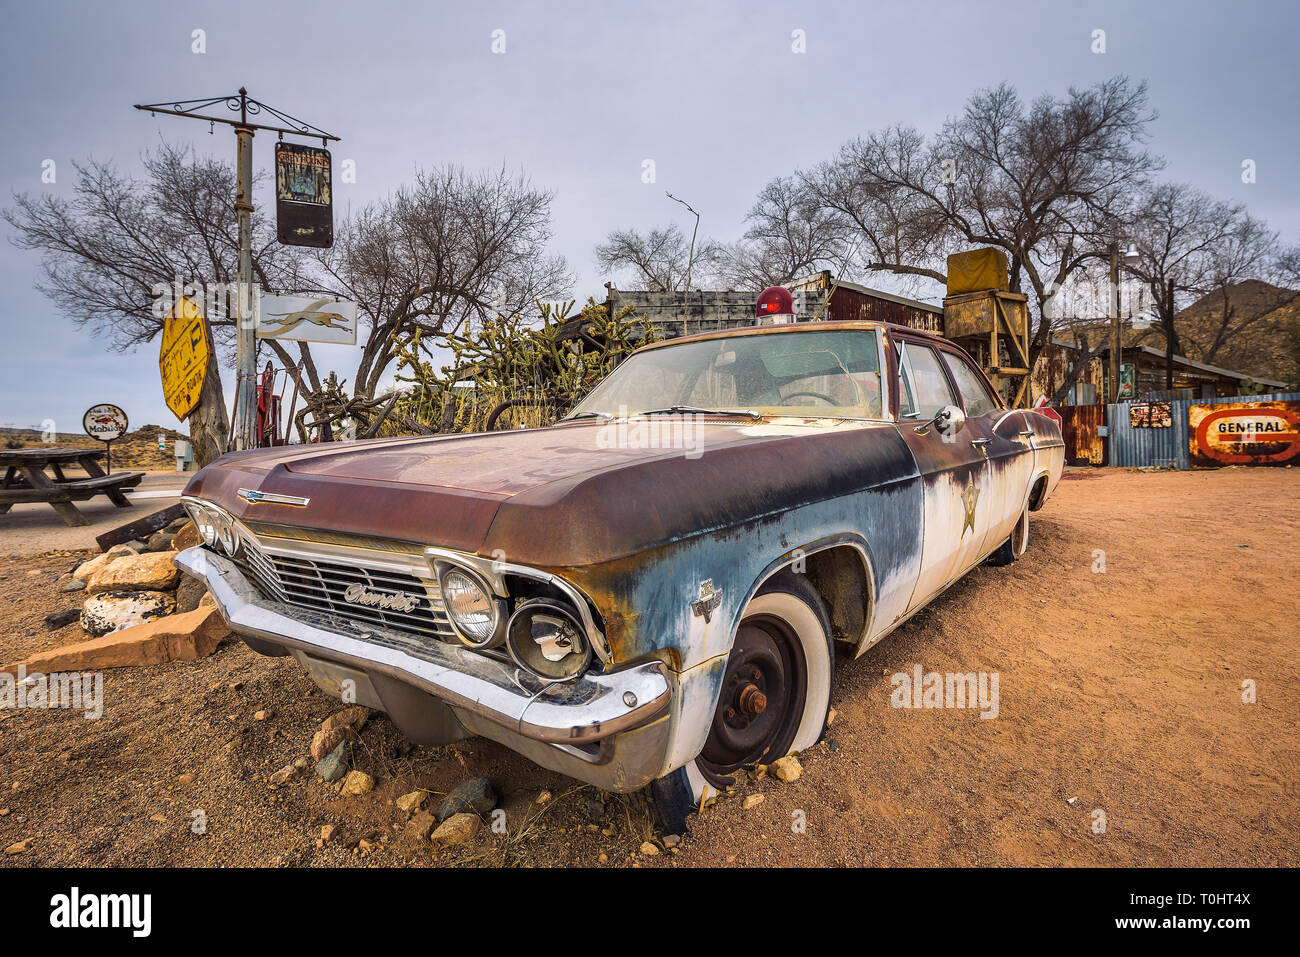 Old sheriff's car with a Siren in Hackberry, Arizona Stock Photo